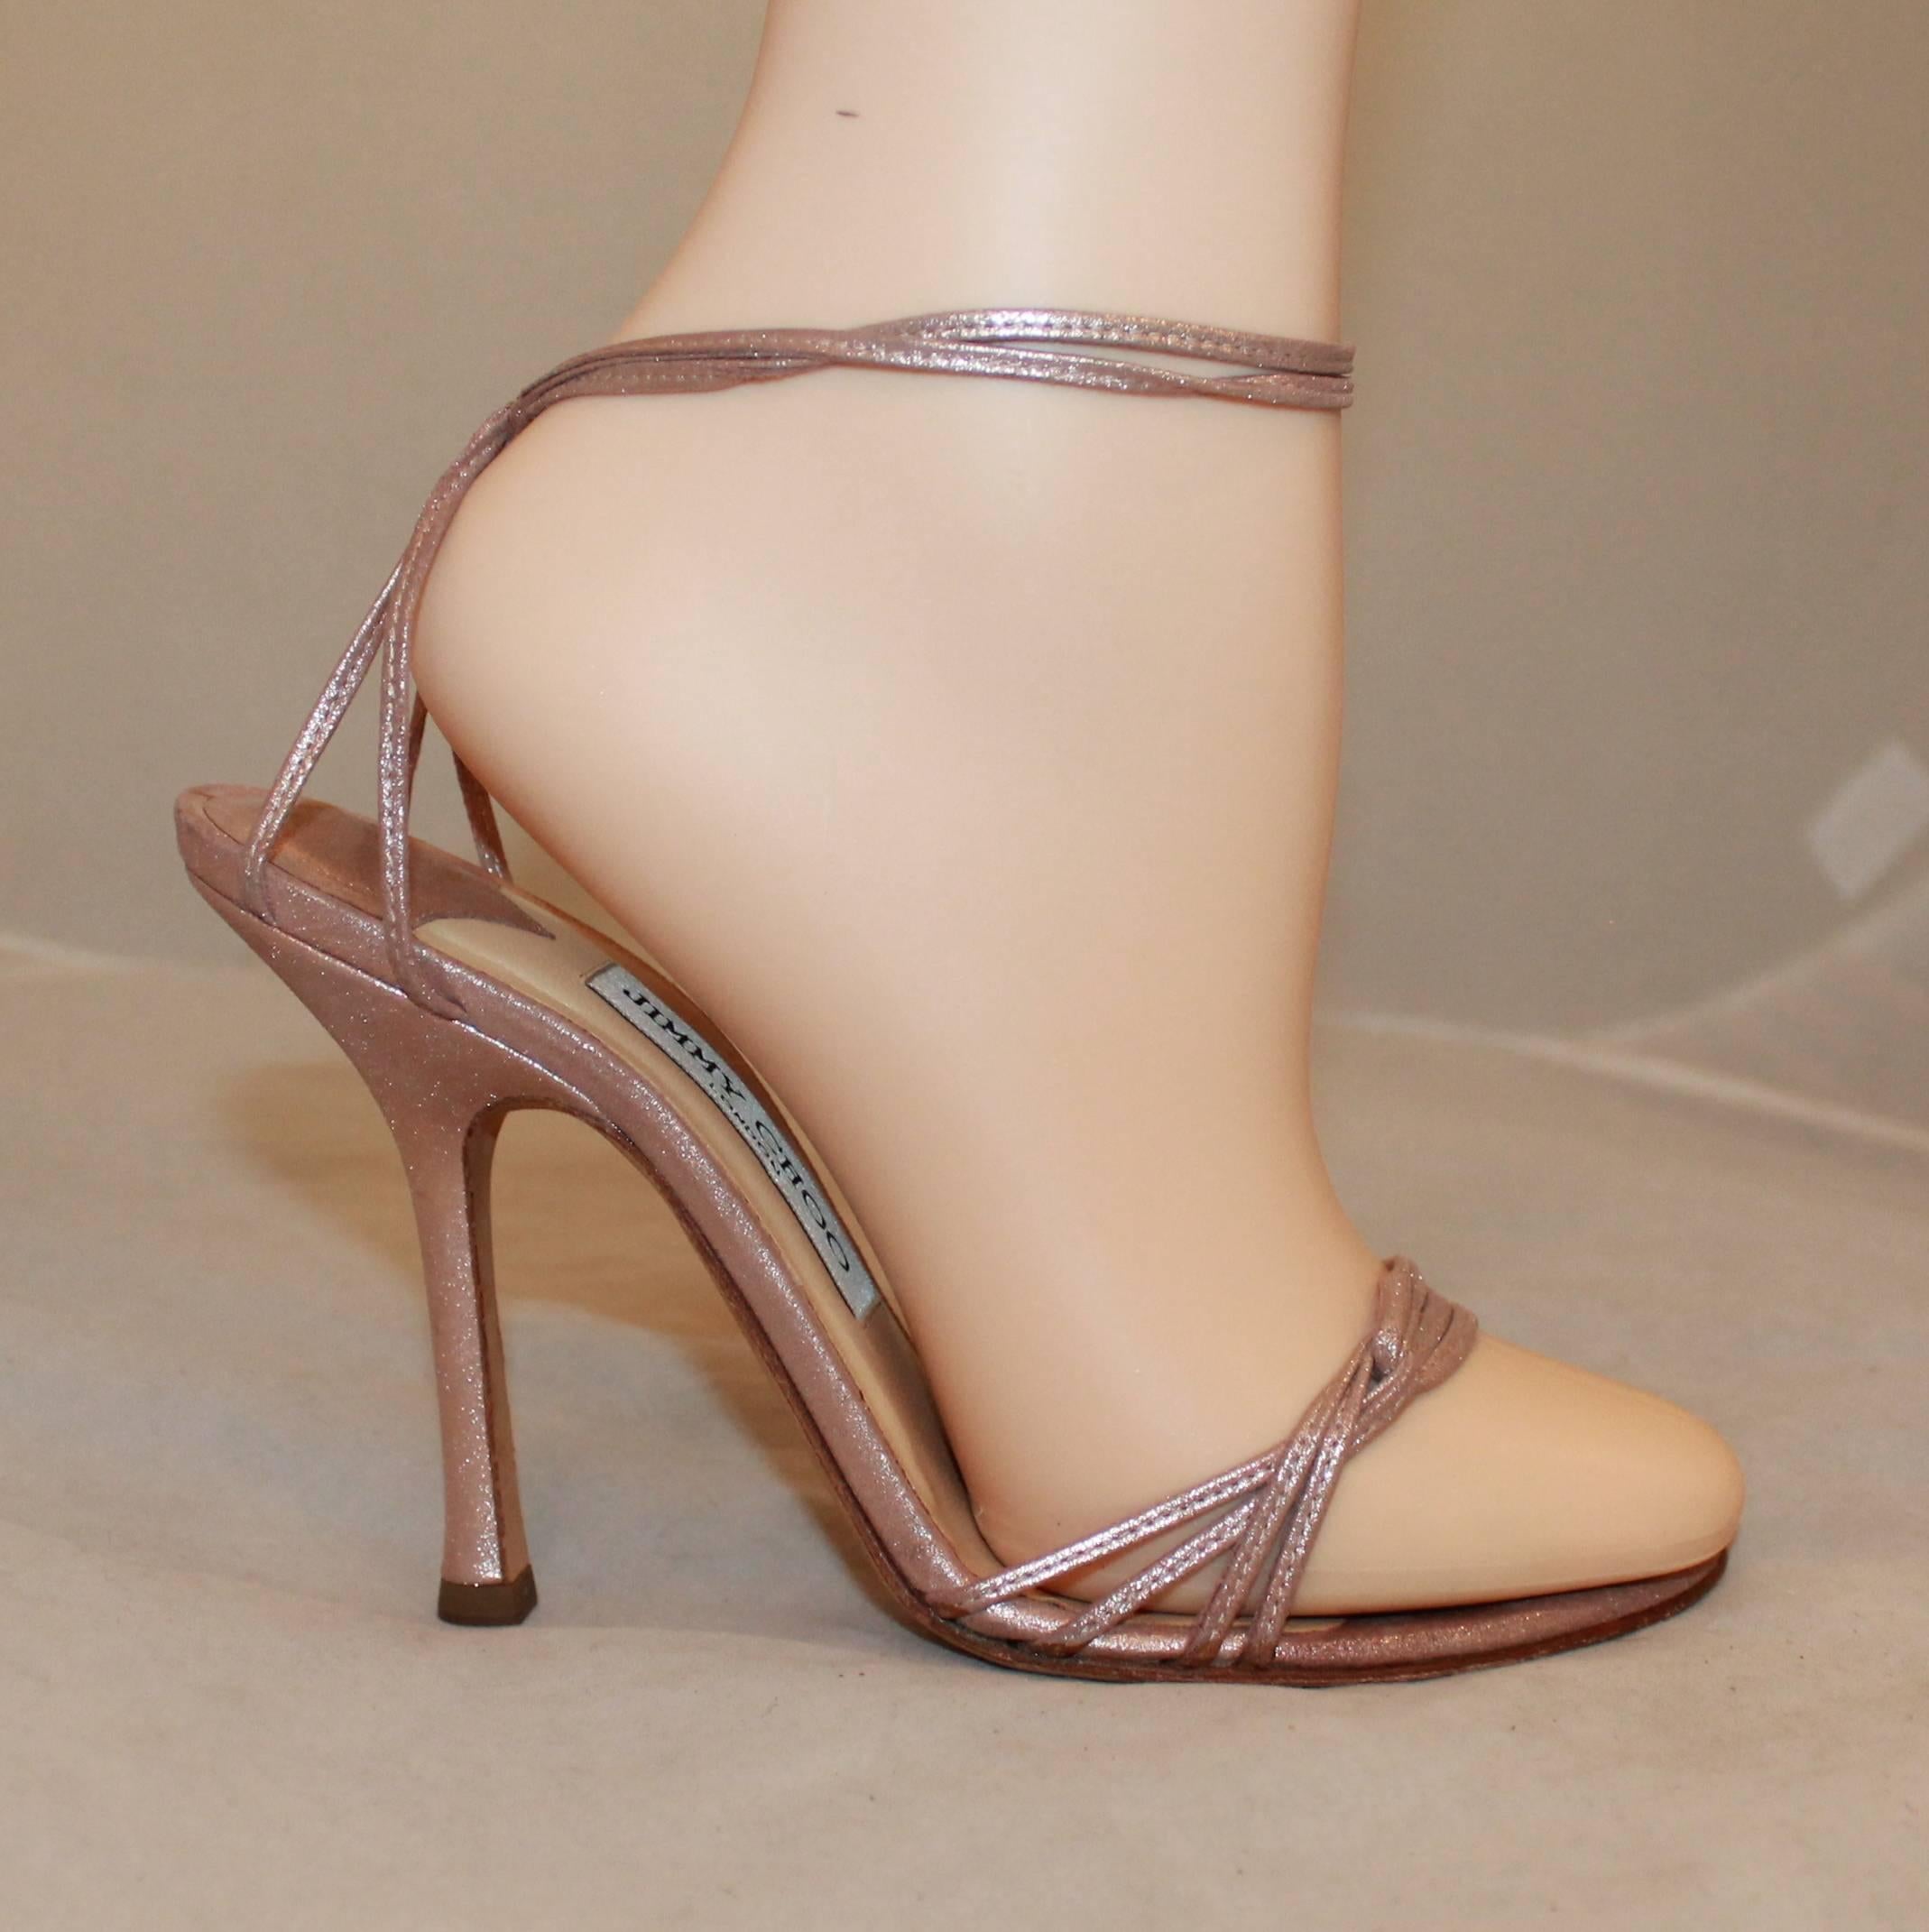 Jimmy Choo Rose Gold Woven Thin Strap Sandals with Ankle Strap - 37. These elegant heels have an ankle strap and have multiple thin, woven straps on the top. They are in good condition are show general wear along with minor bottom wear.